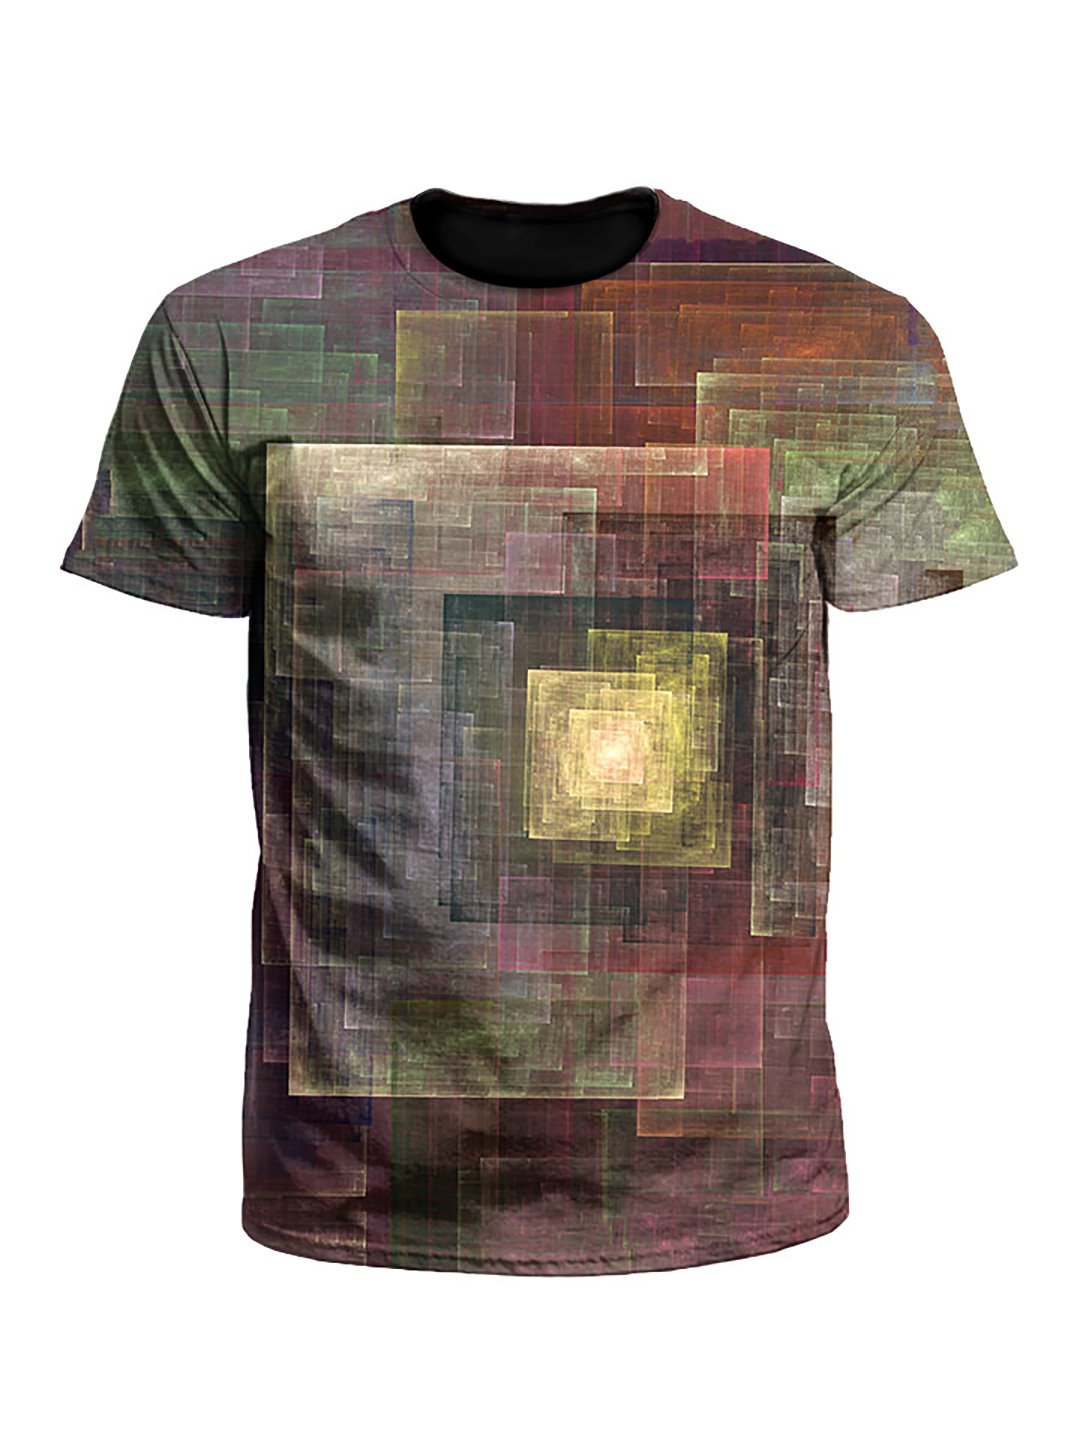 Colorful Impression Abstract Geometric Unisex T-Shirt - Boogie Threads